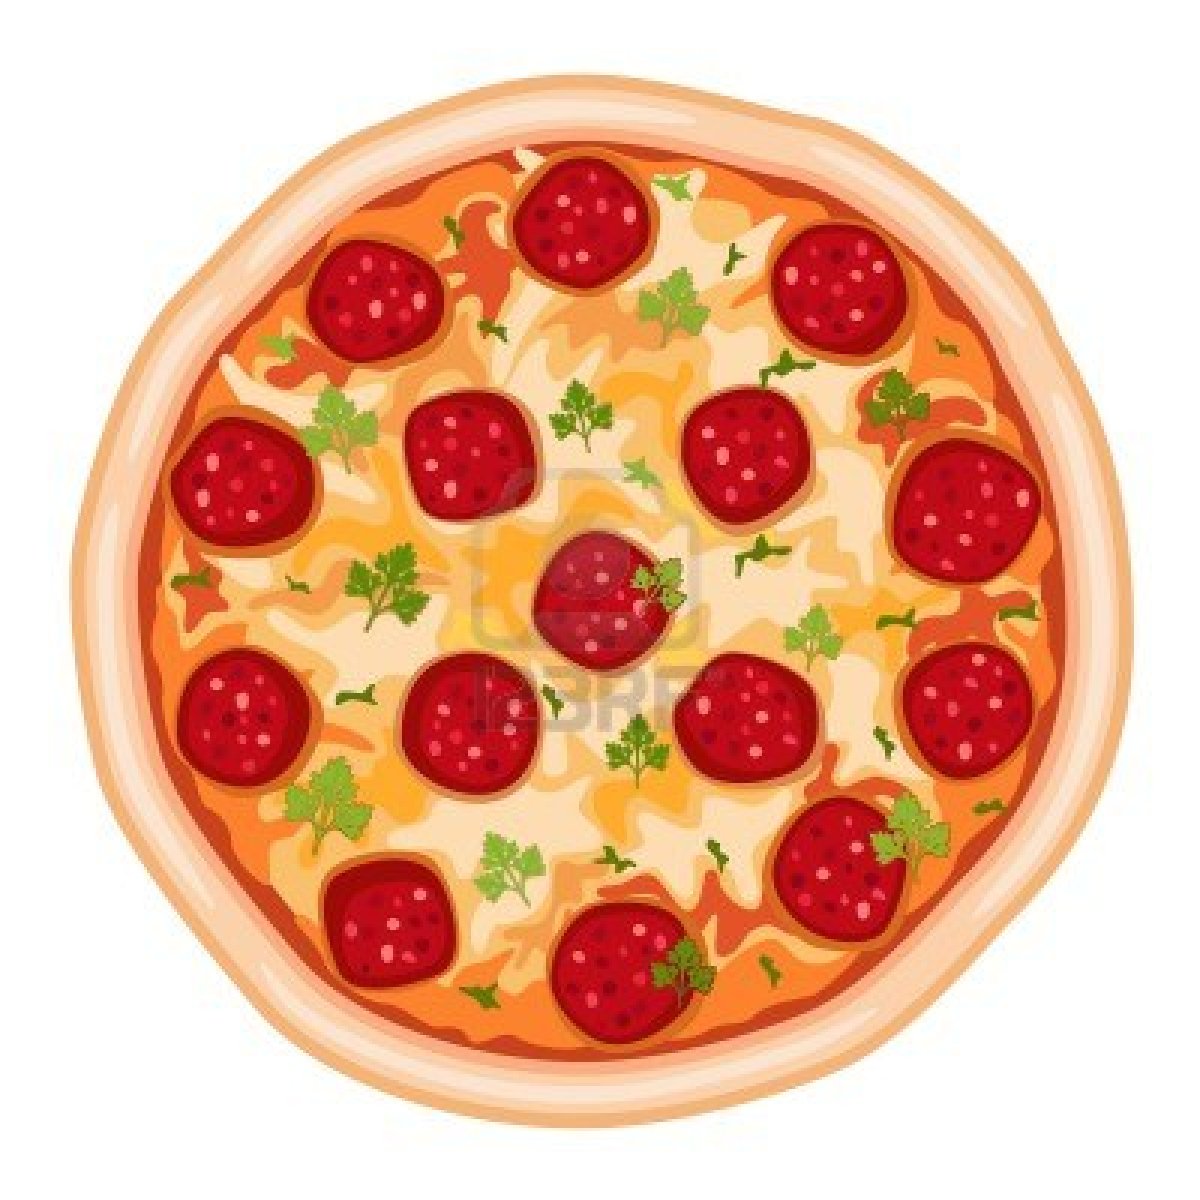 Pizza Images About On Hd Photo Clipart